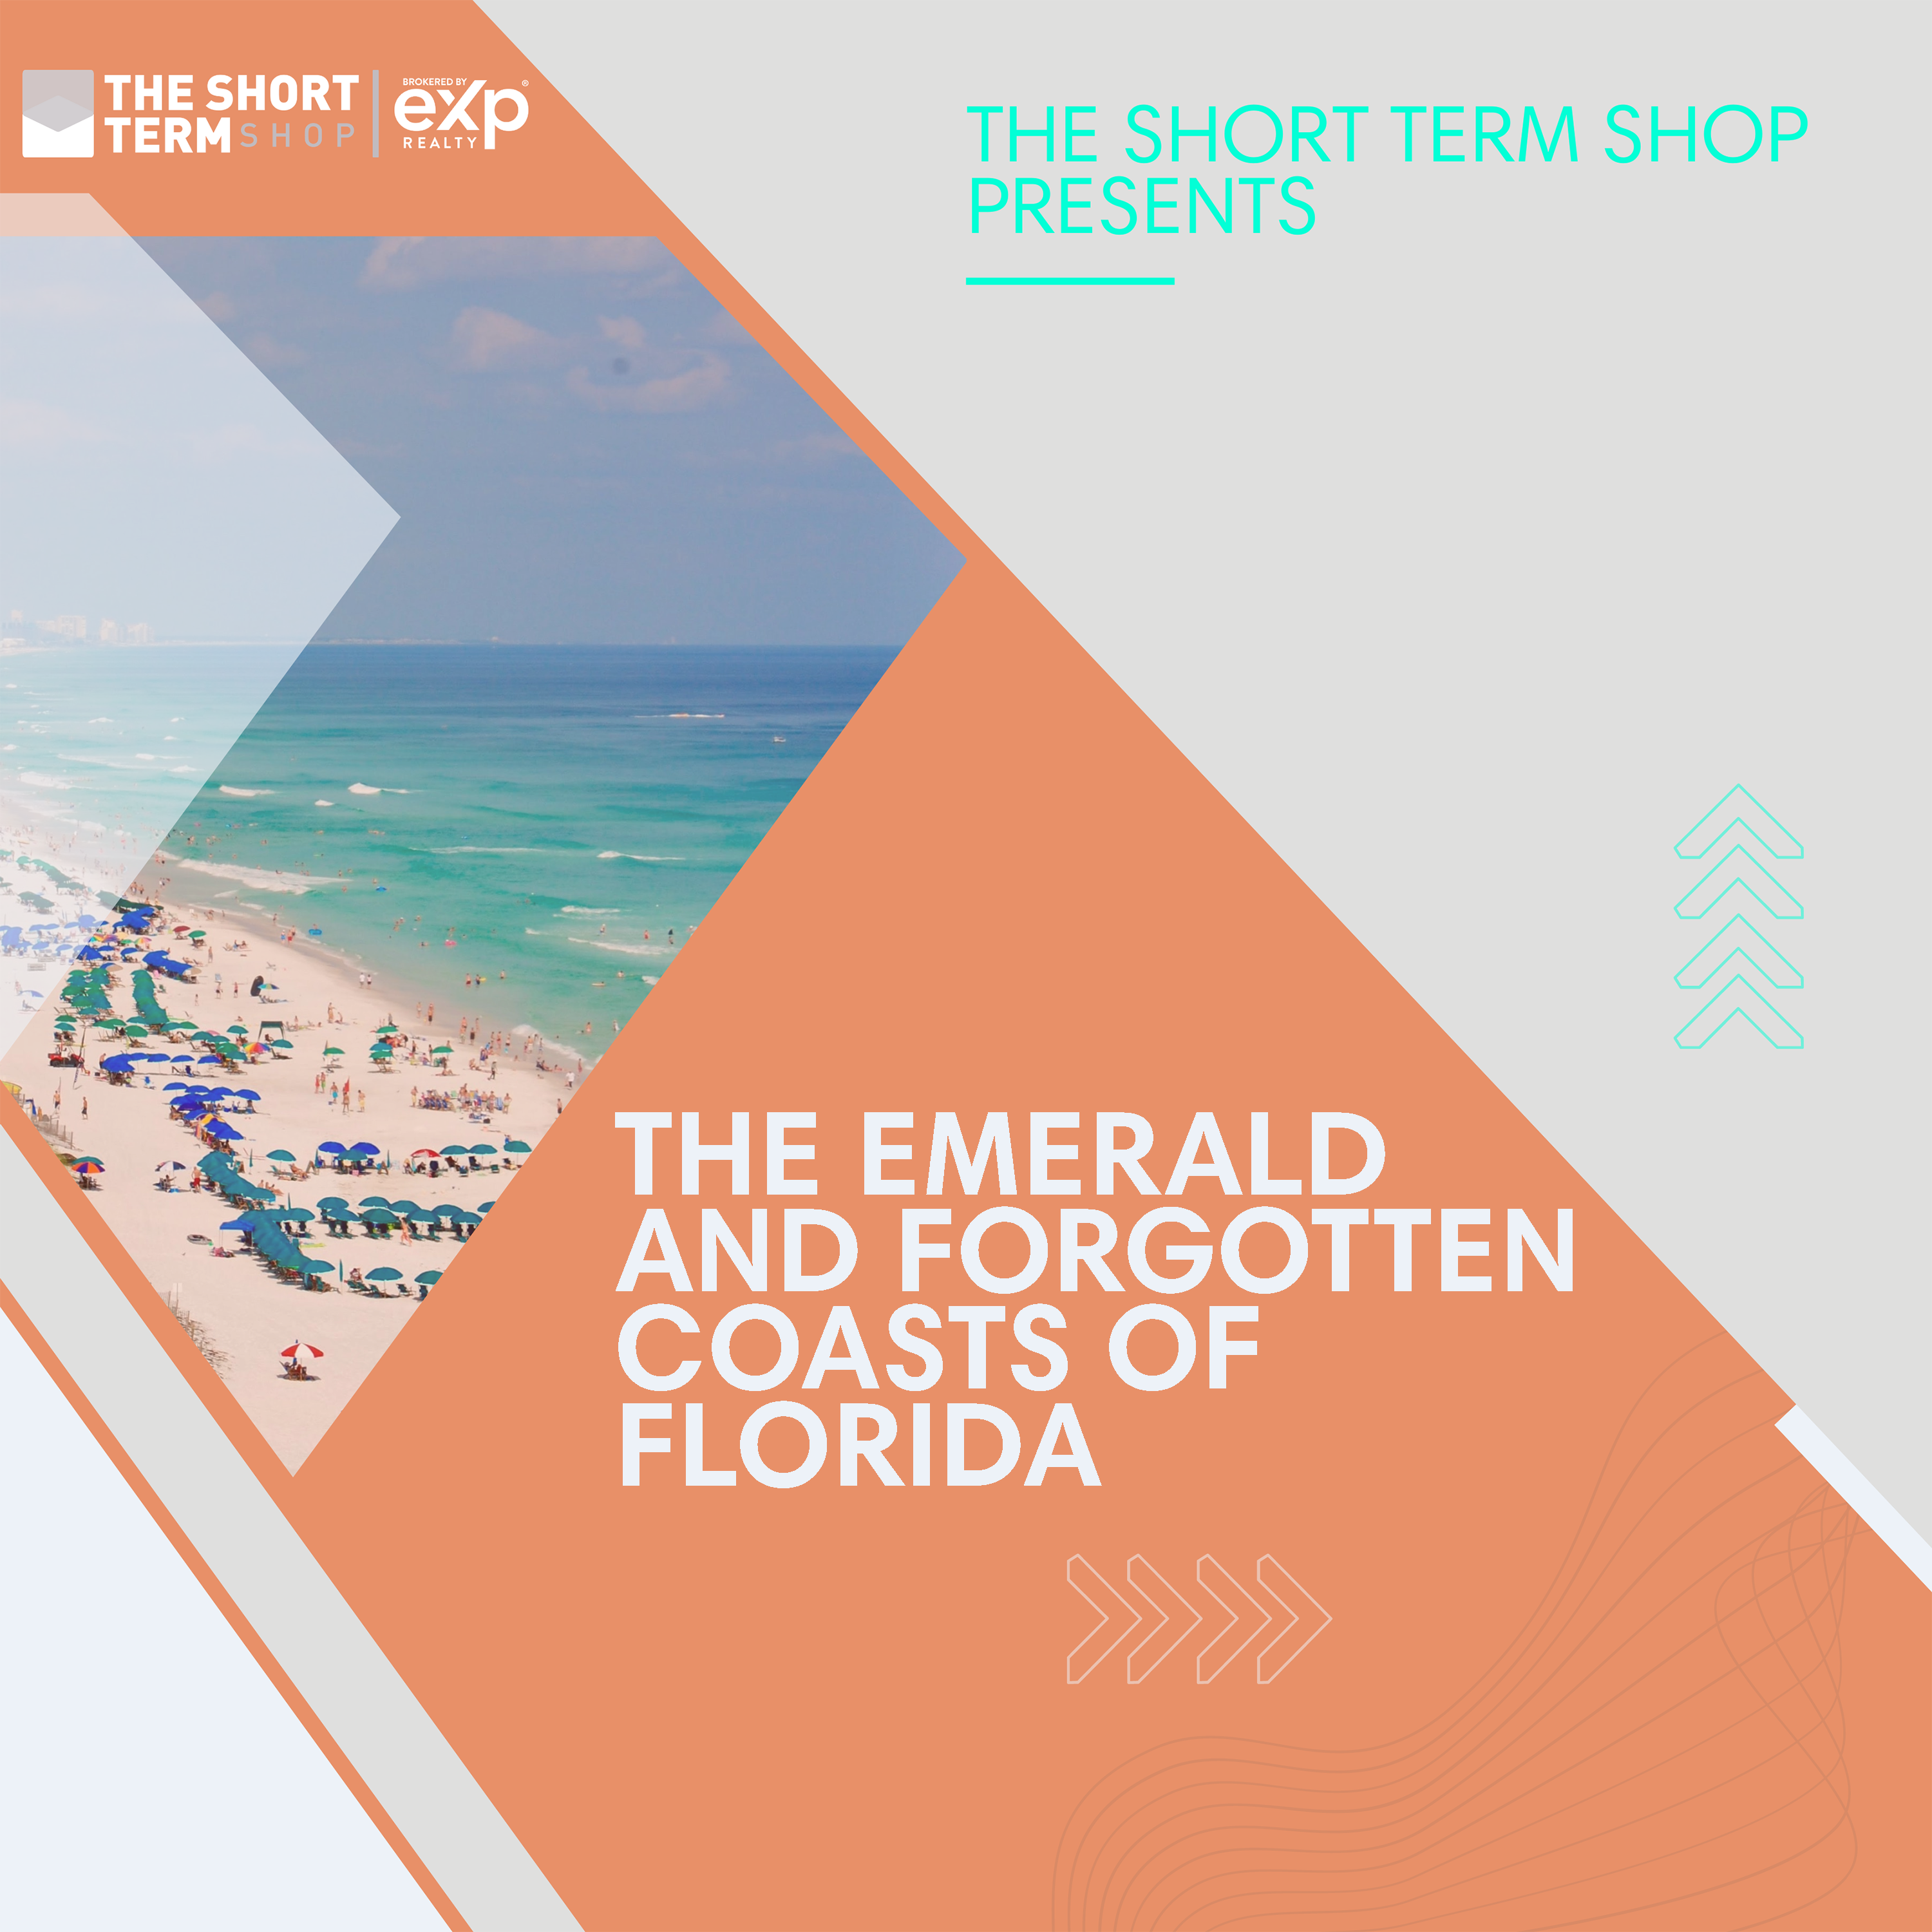 The Real Estate Contract Process When Investing in Short Term Rentals in the Emerald and Forgotten Coasts of Florida